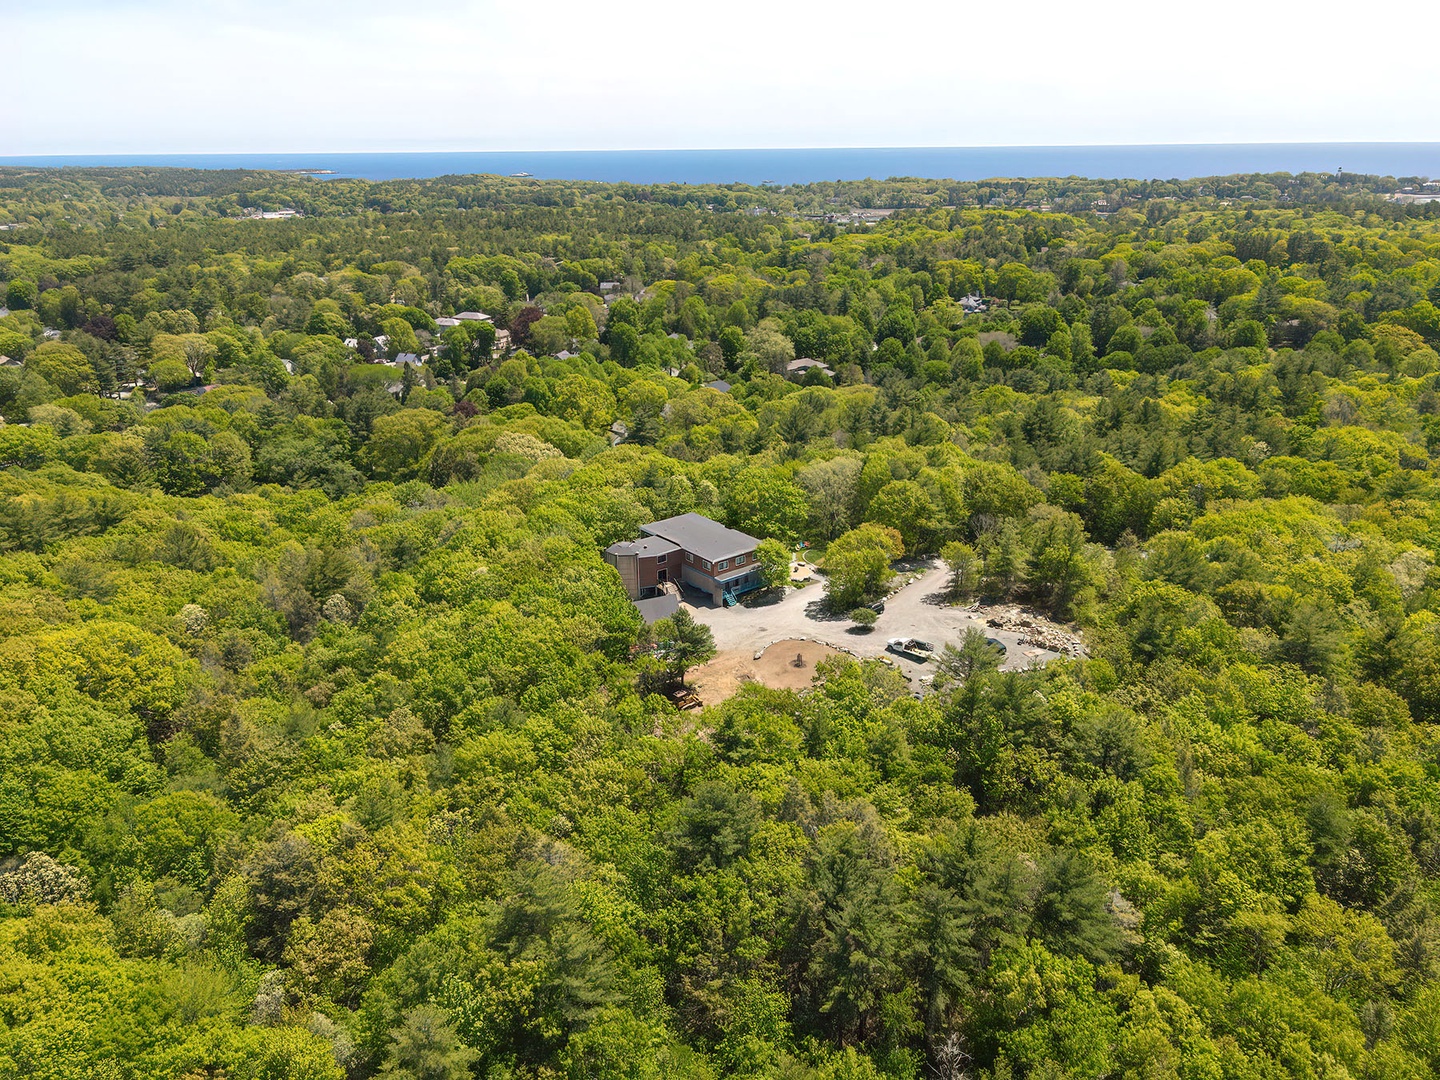 A bird's eye view of the property.